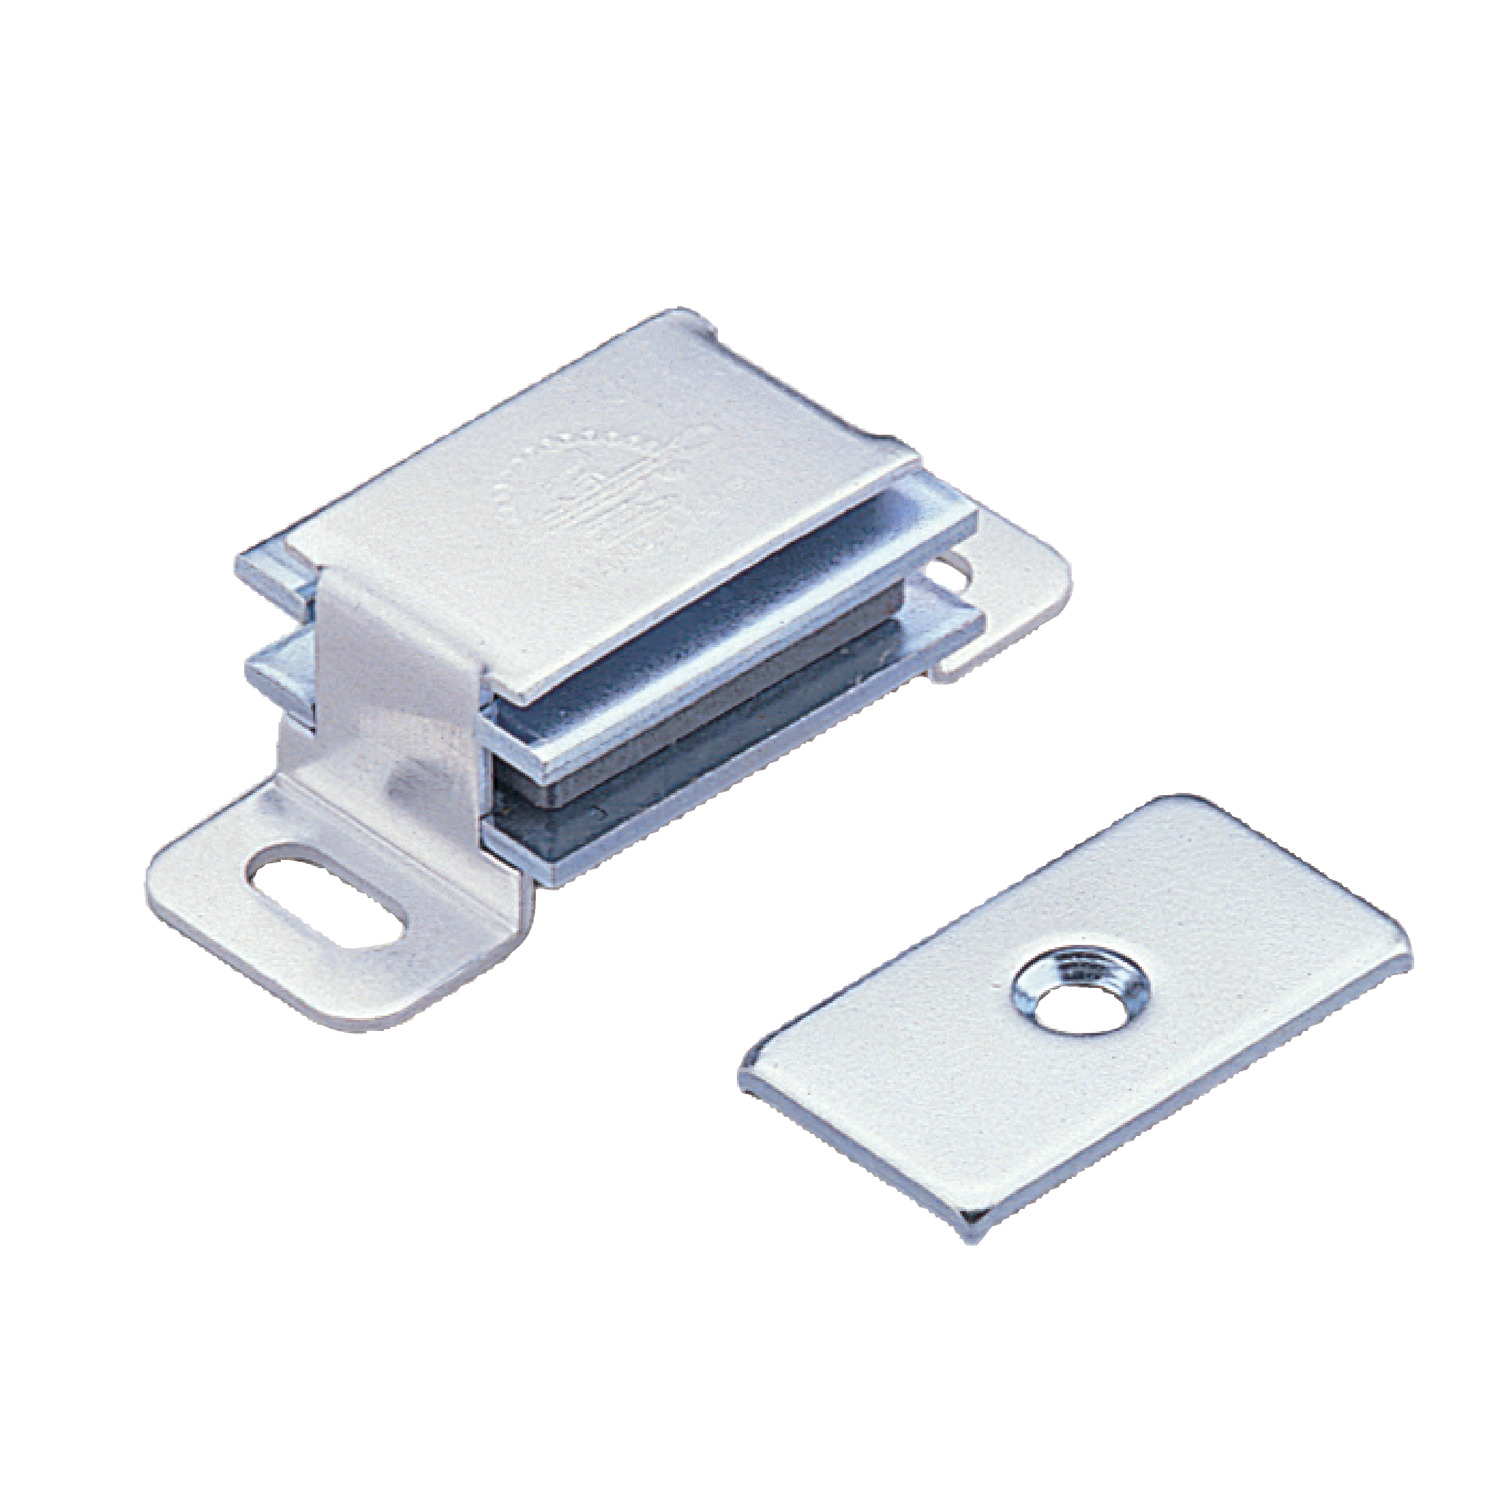 Magnetic Catches Magnetic catch in aluminium housing for general application enviroments